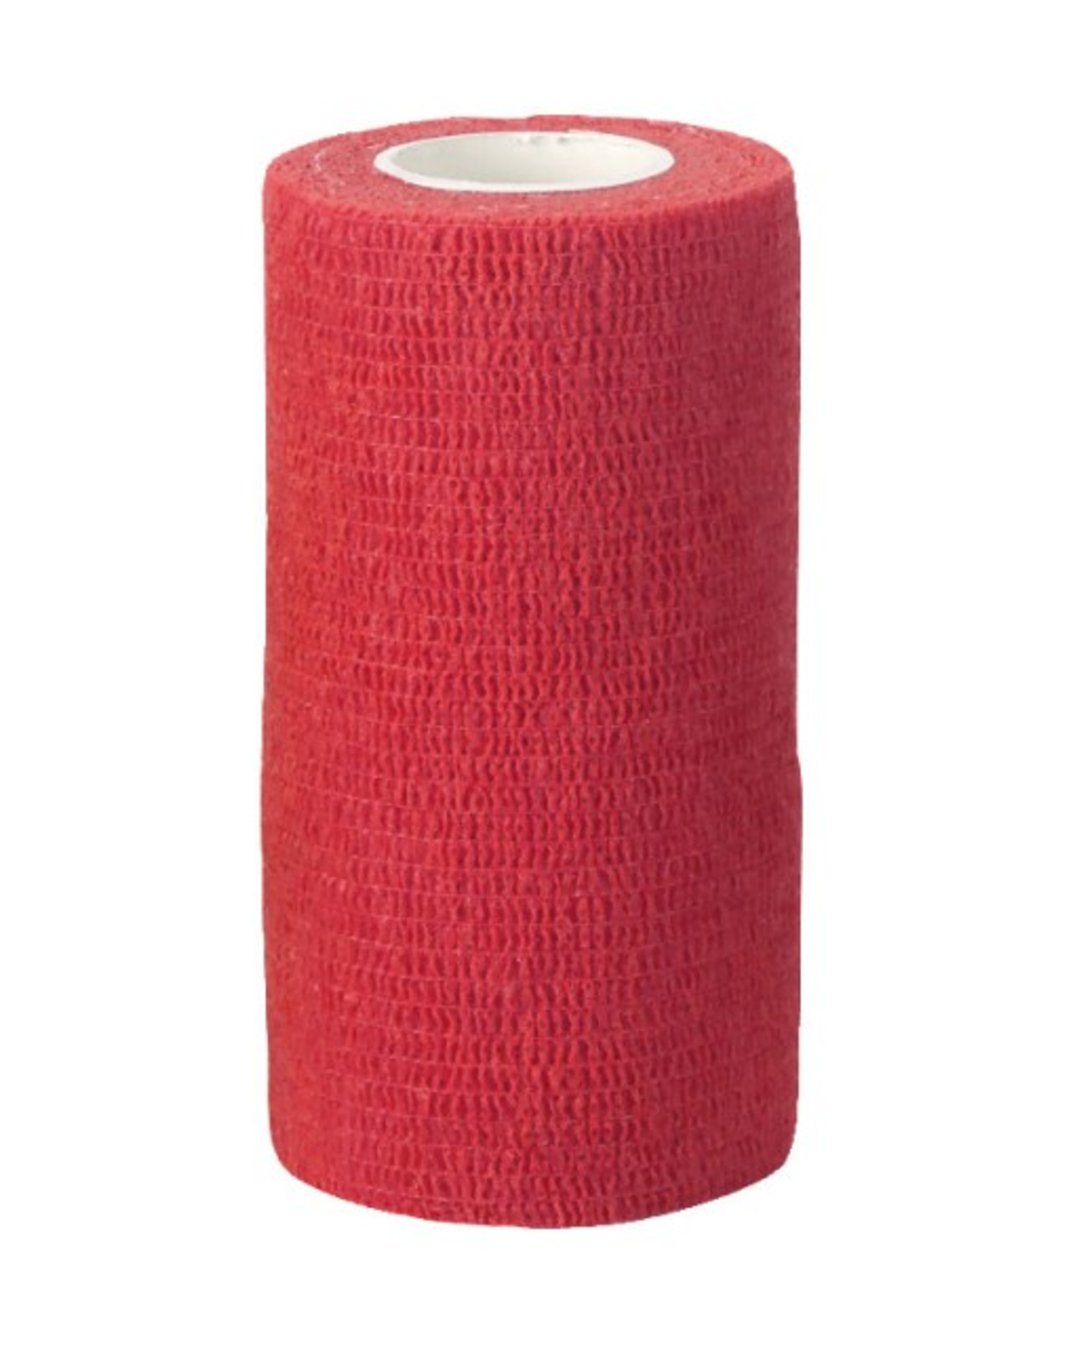 Selbsthaftende Bandage EquiLastic Rot 10 cm